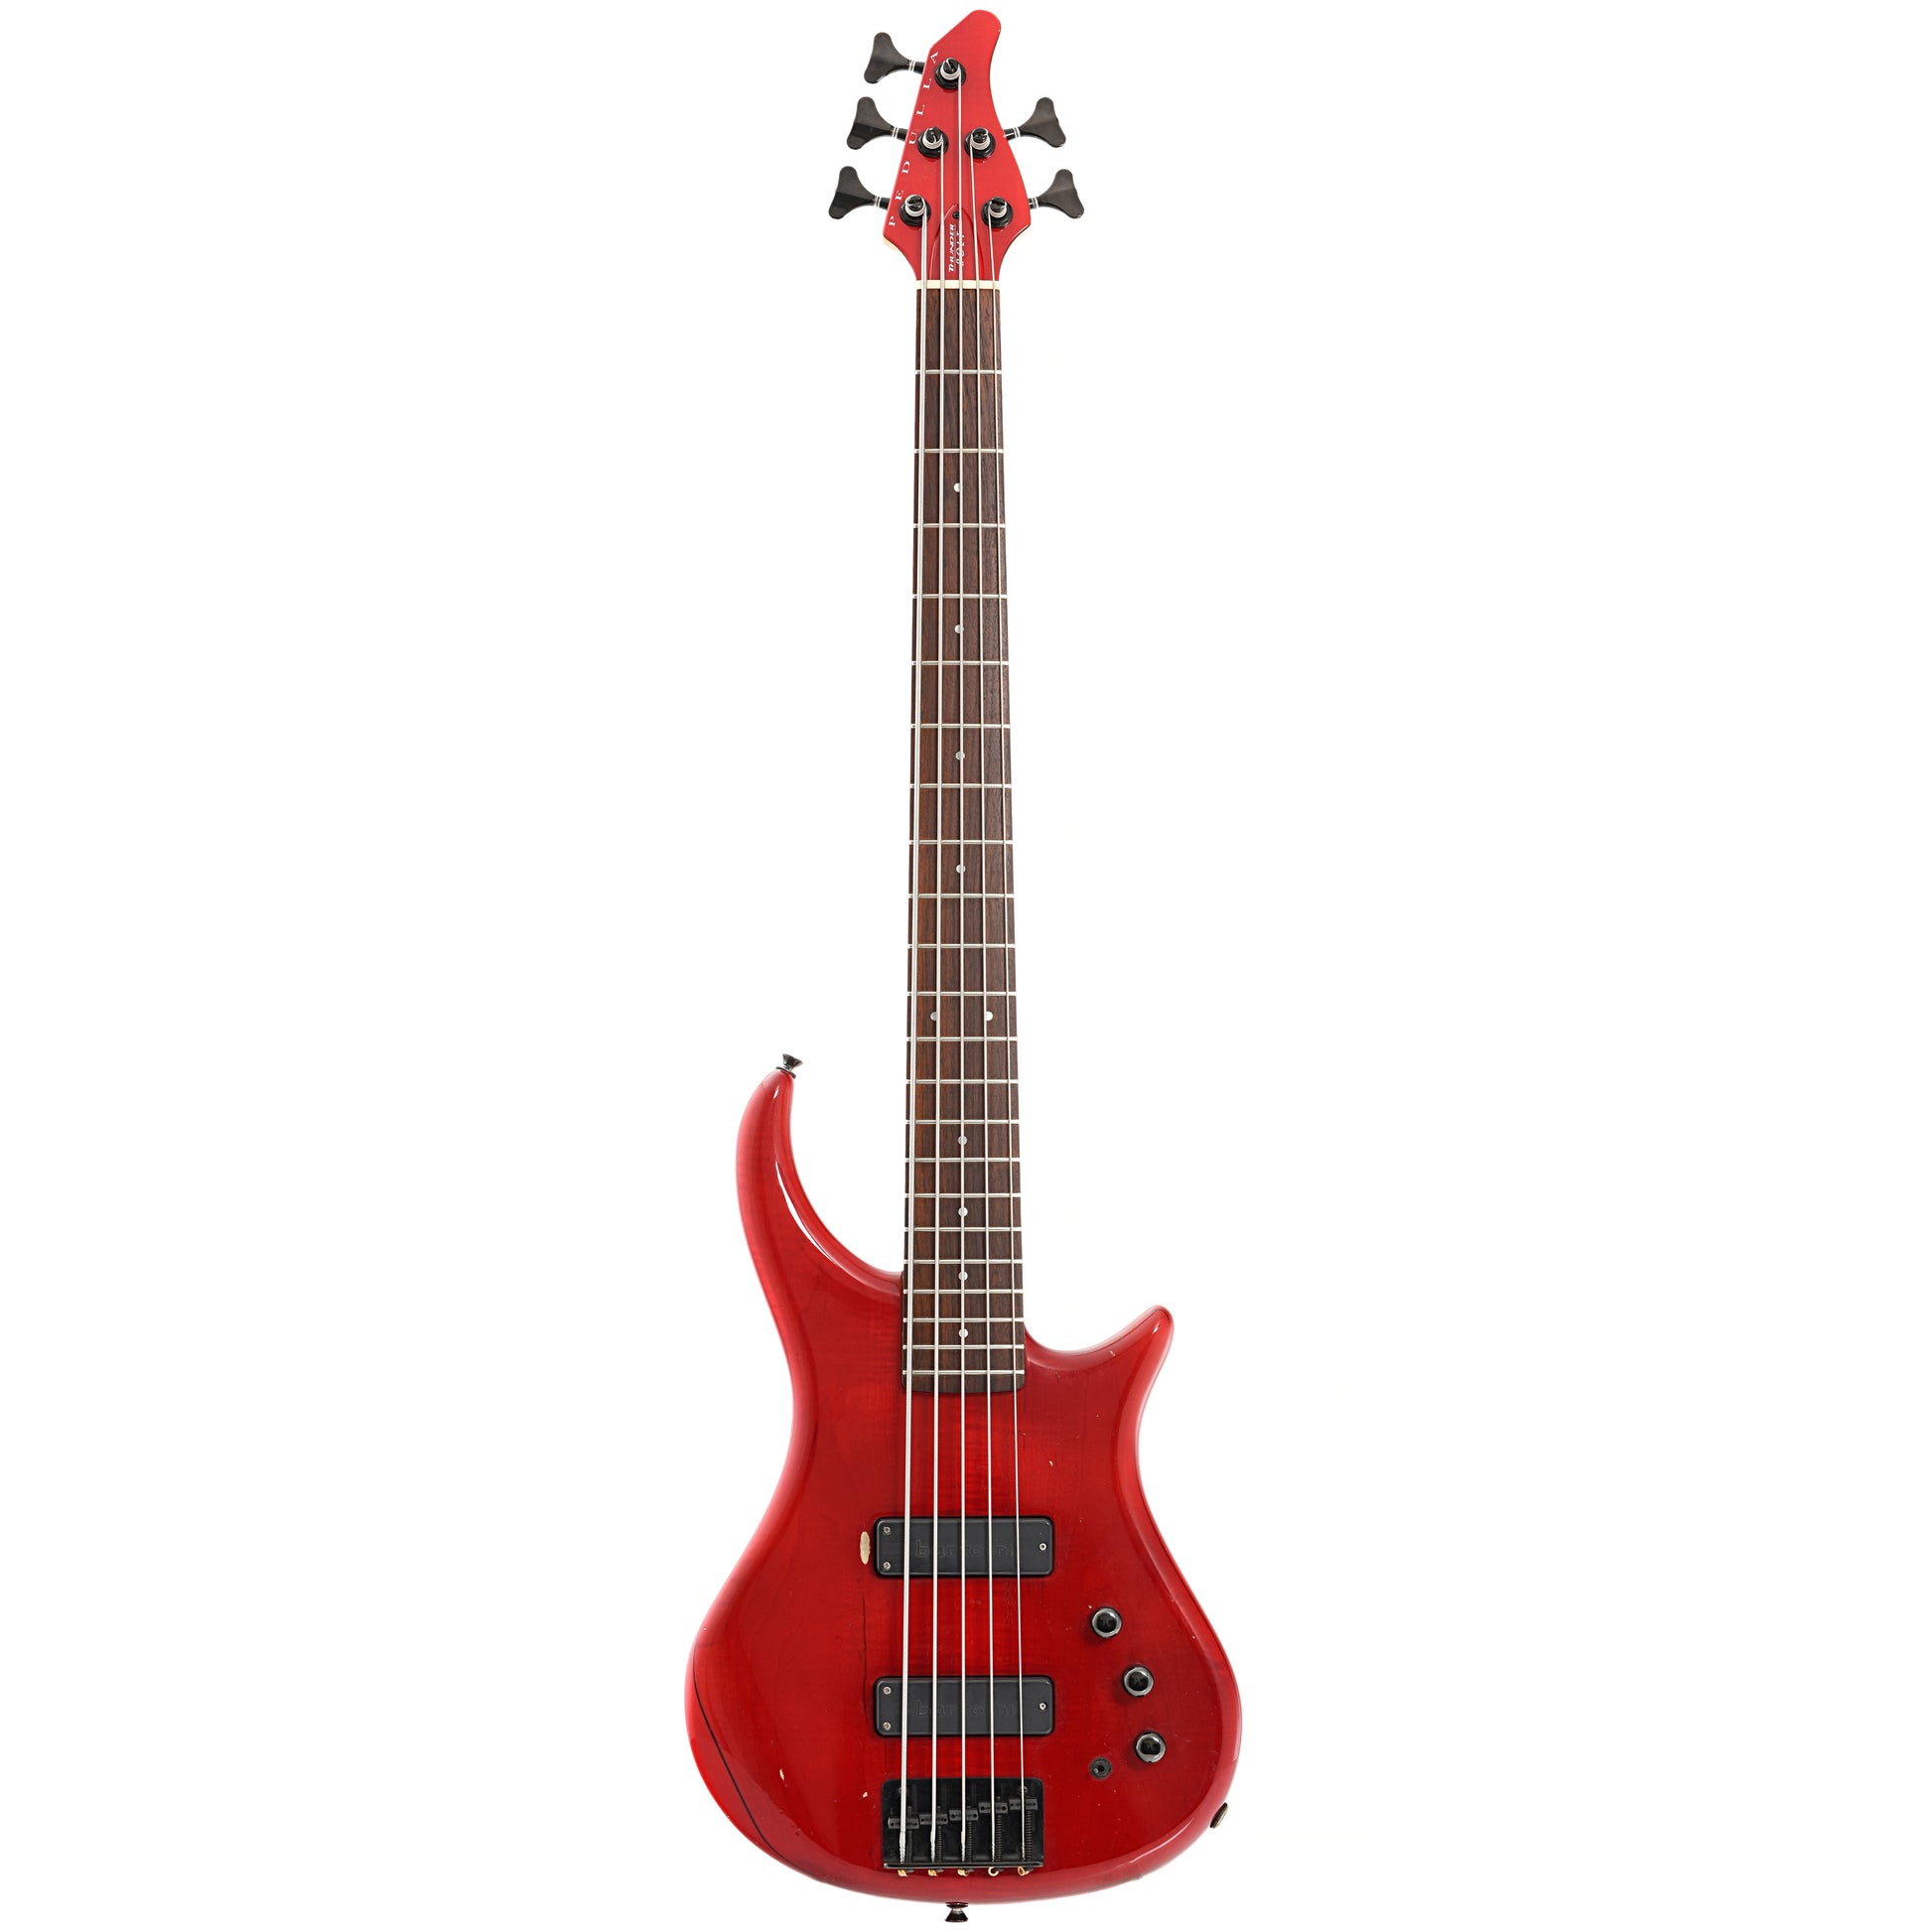 Full front of Pedulla Thunder Bolt 5-String Electric Bass